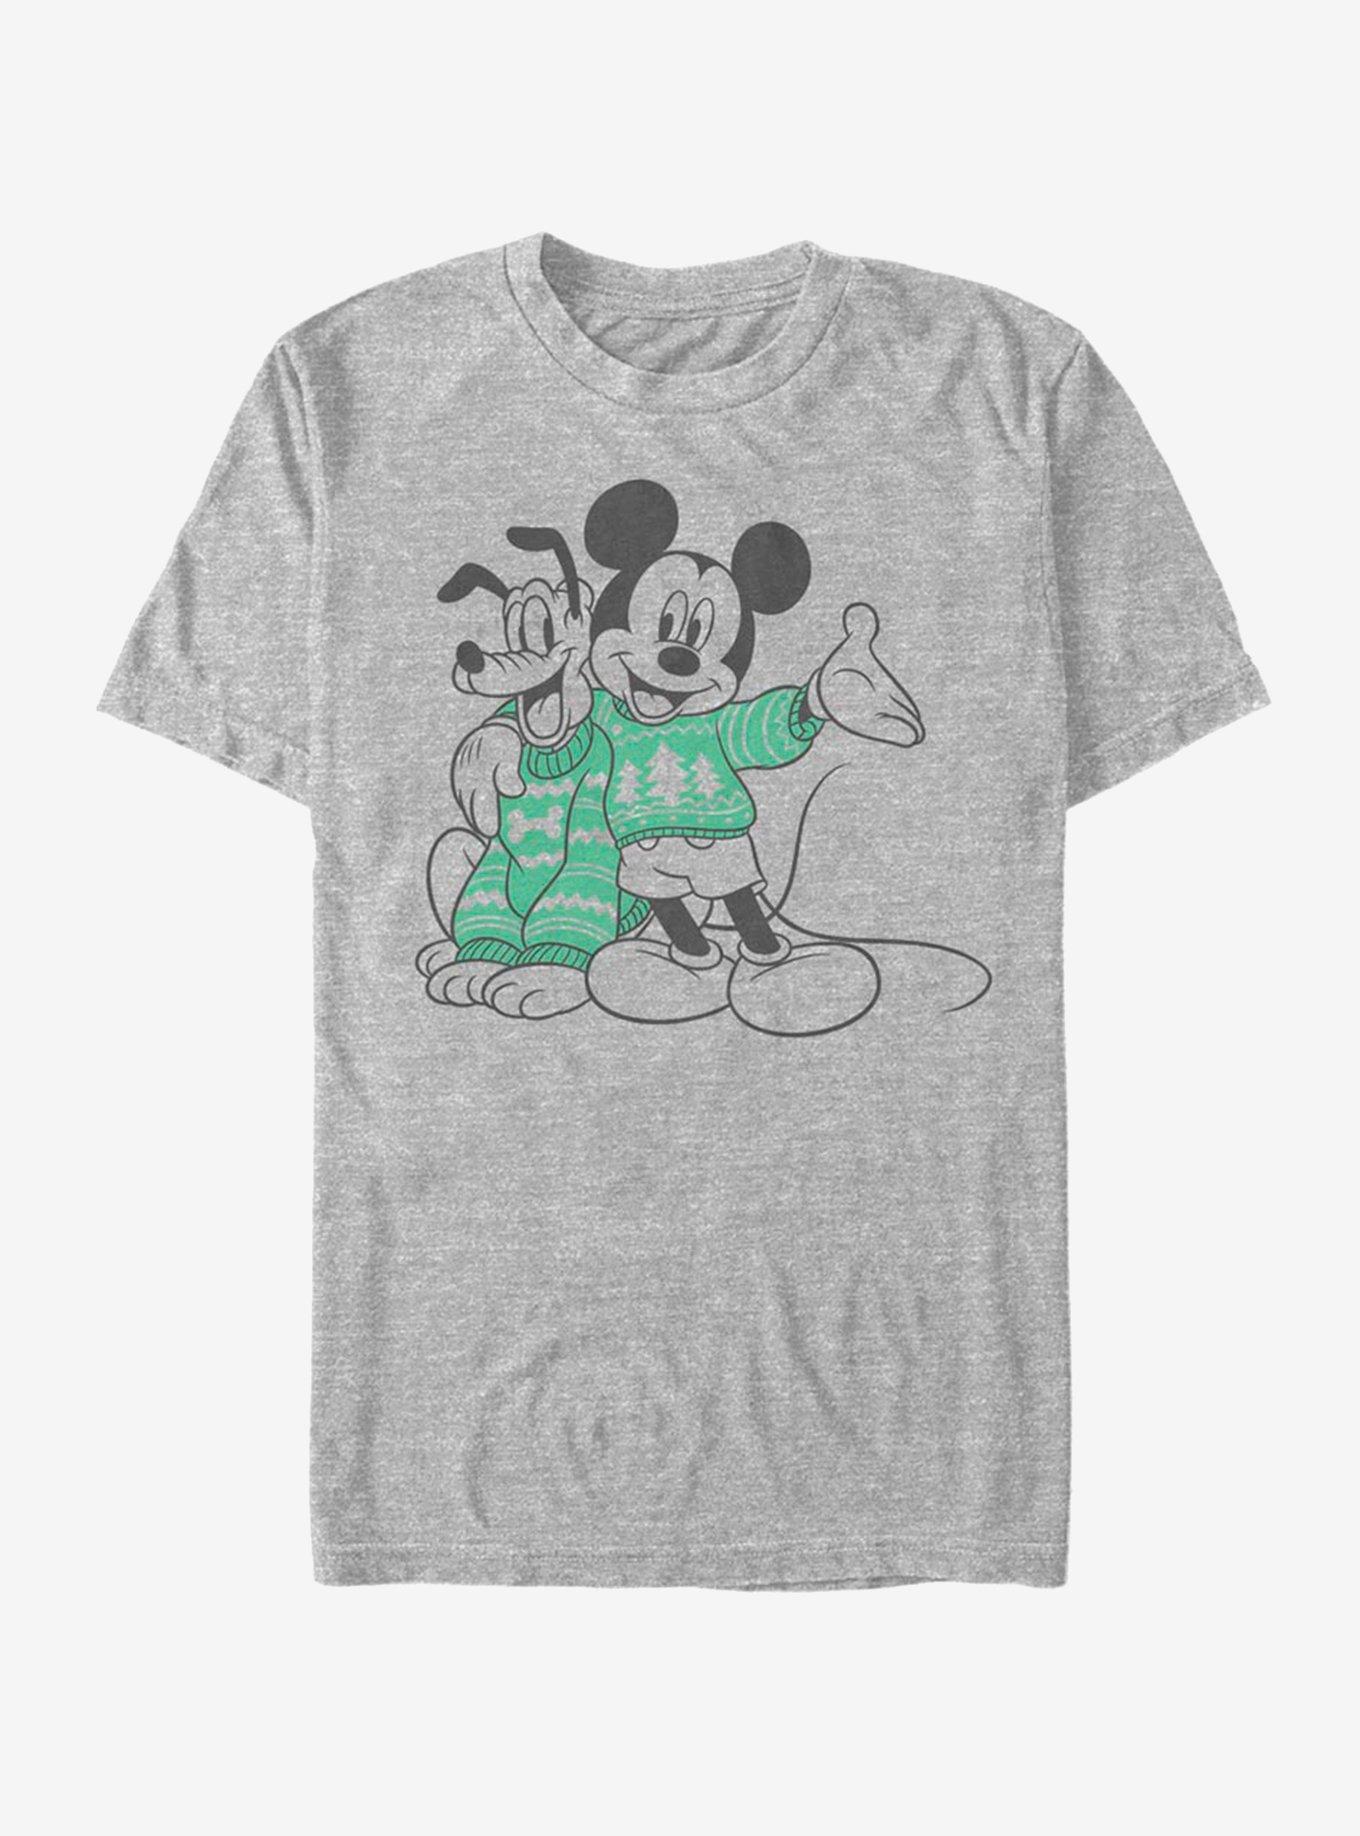 Disney Mickey Mouse & Pluto Holiday Sweater Pals T-Shirt